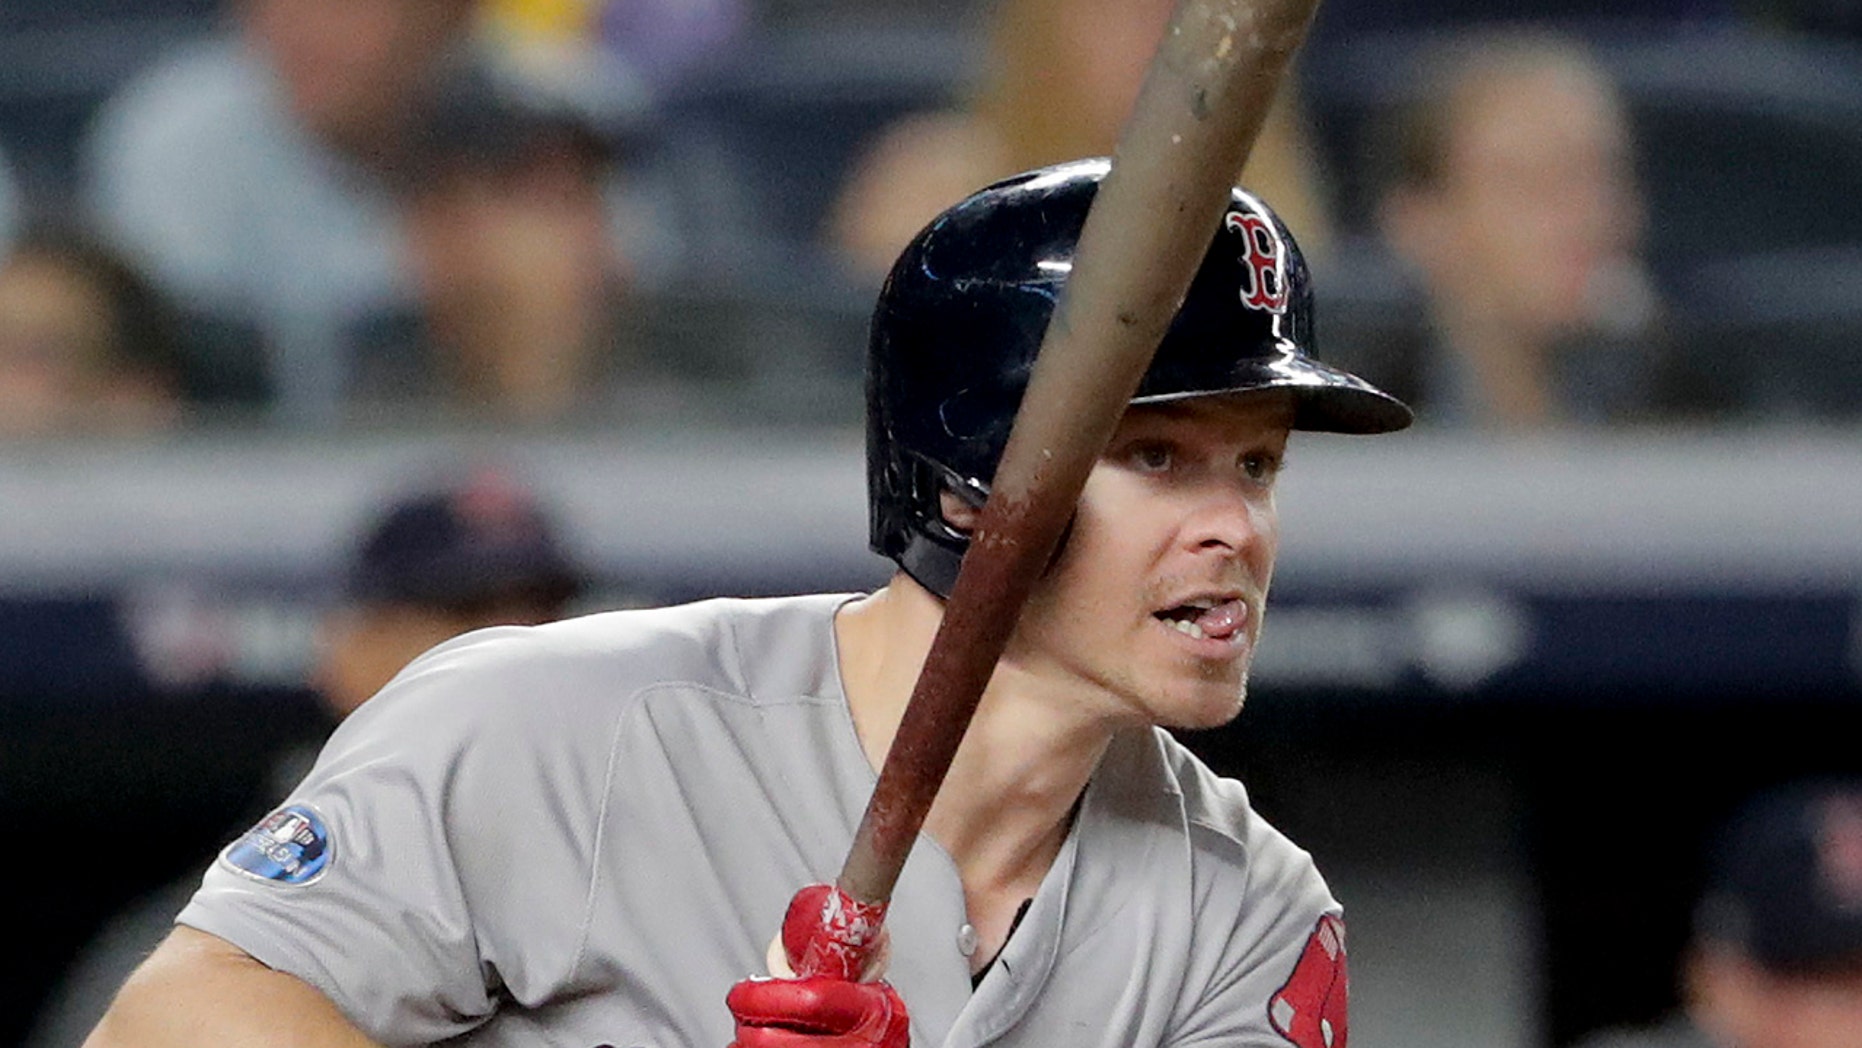 Boston Red Sox infielder Brock Holt has historic playoff game against